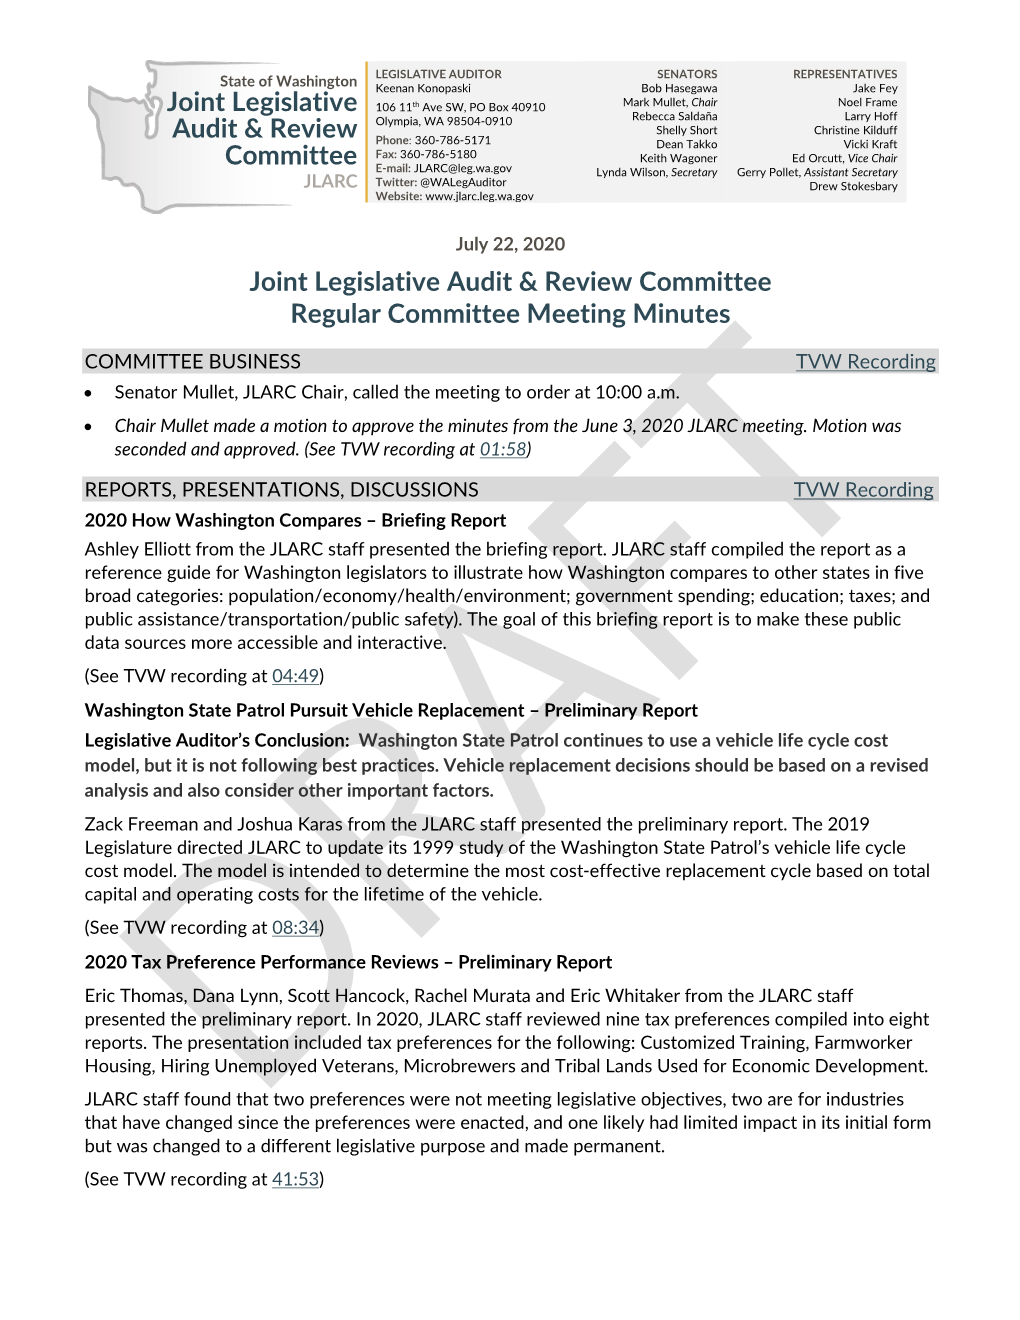 July 22, 2020 Meeting Minutes